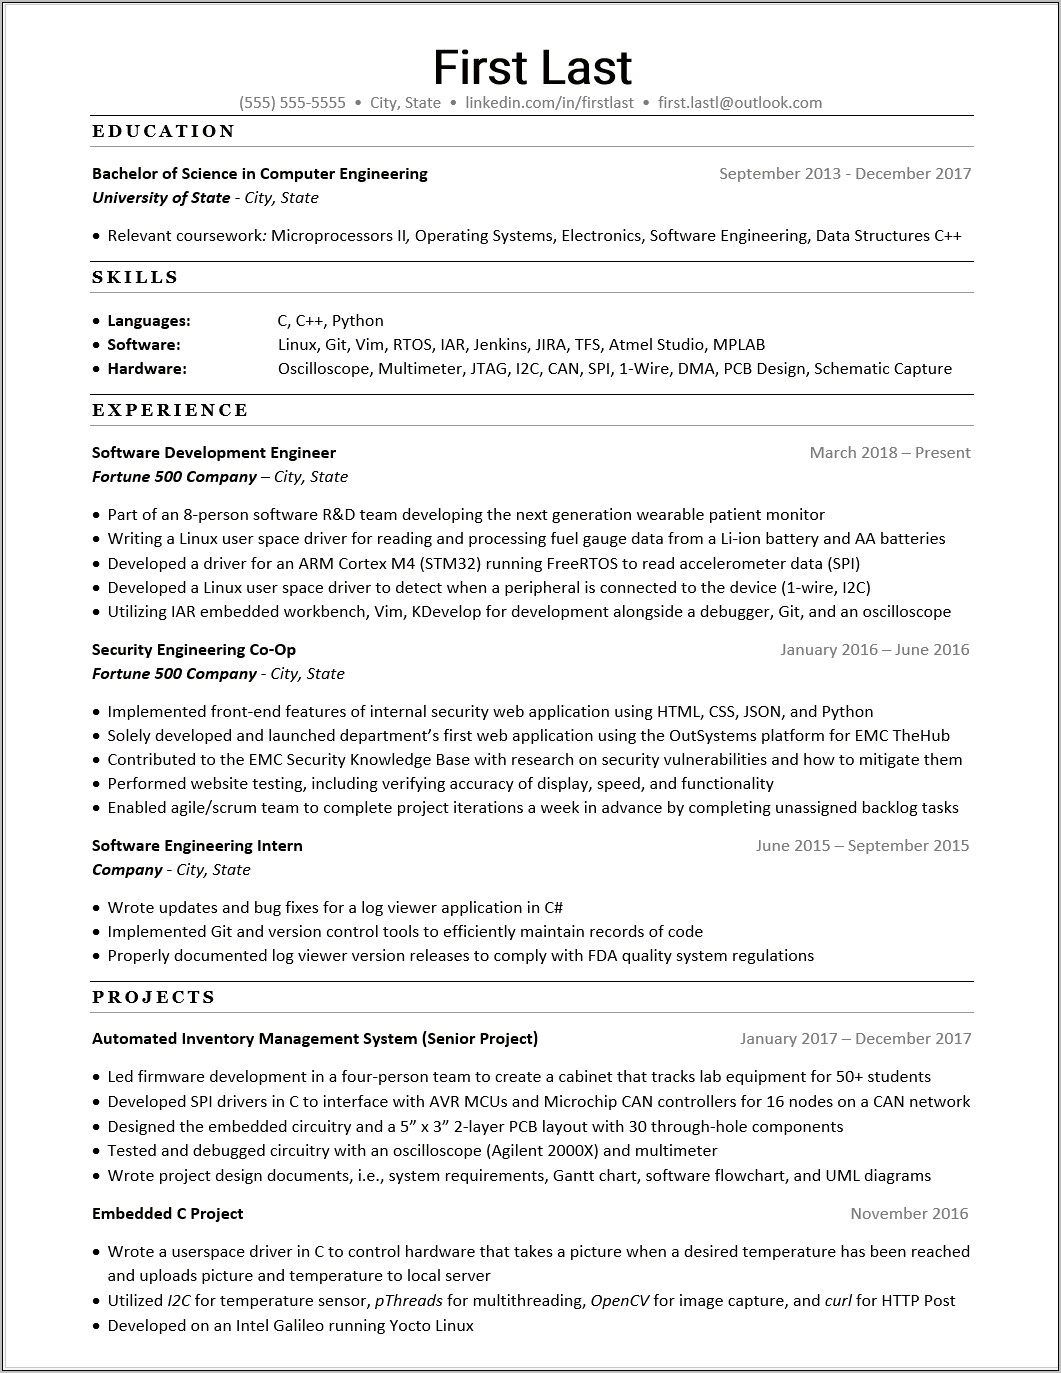 Computer Engineer Sample Resume For